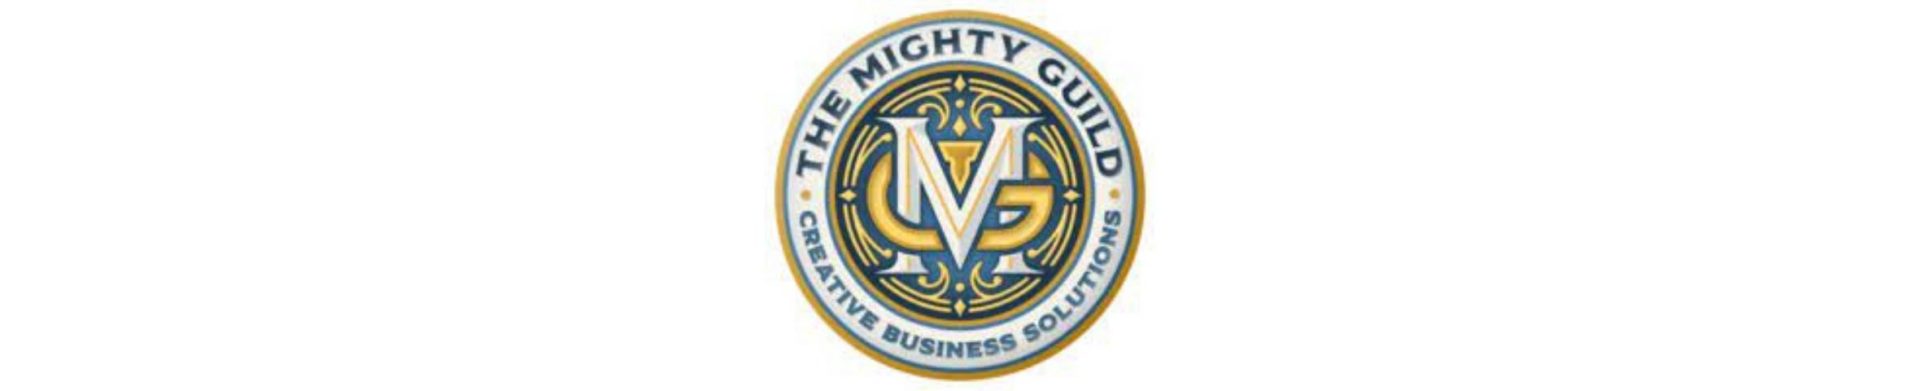 The Mighty Guild logo with creative business solutions written below